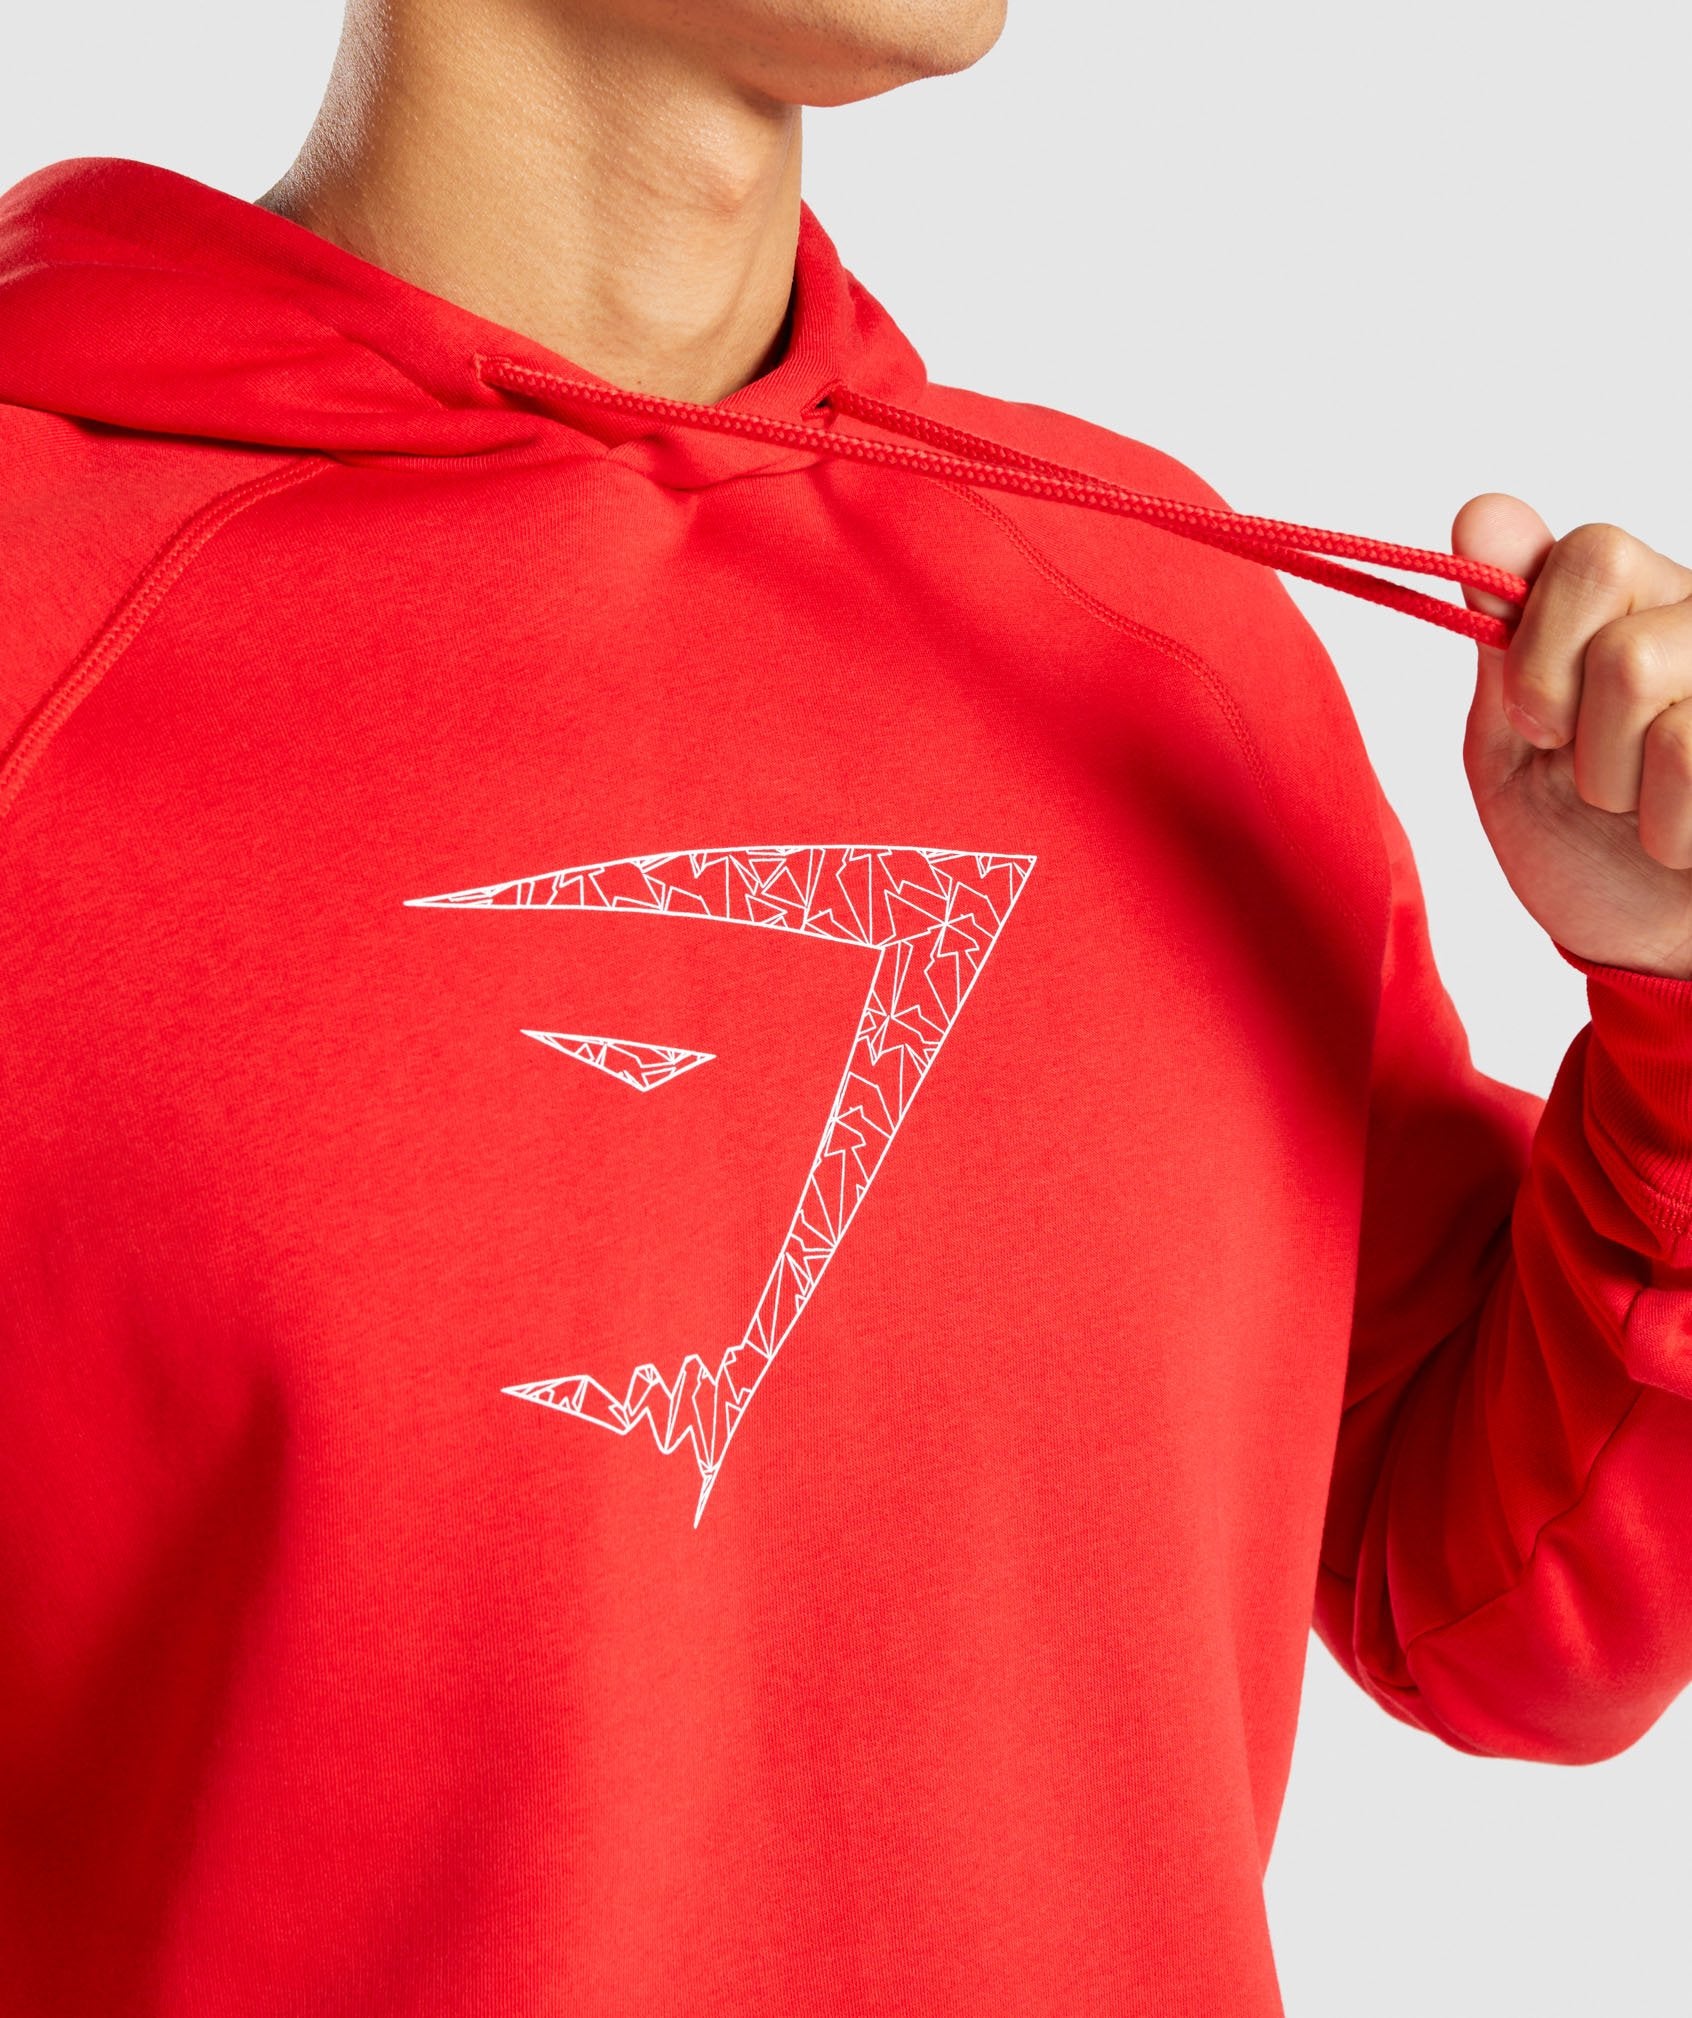 Infill Hoodie in Red - view 6